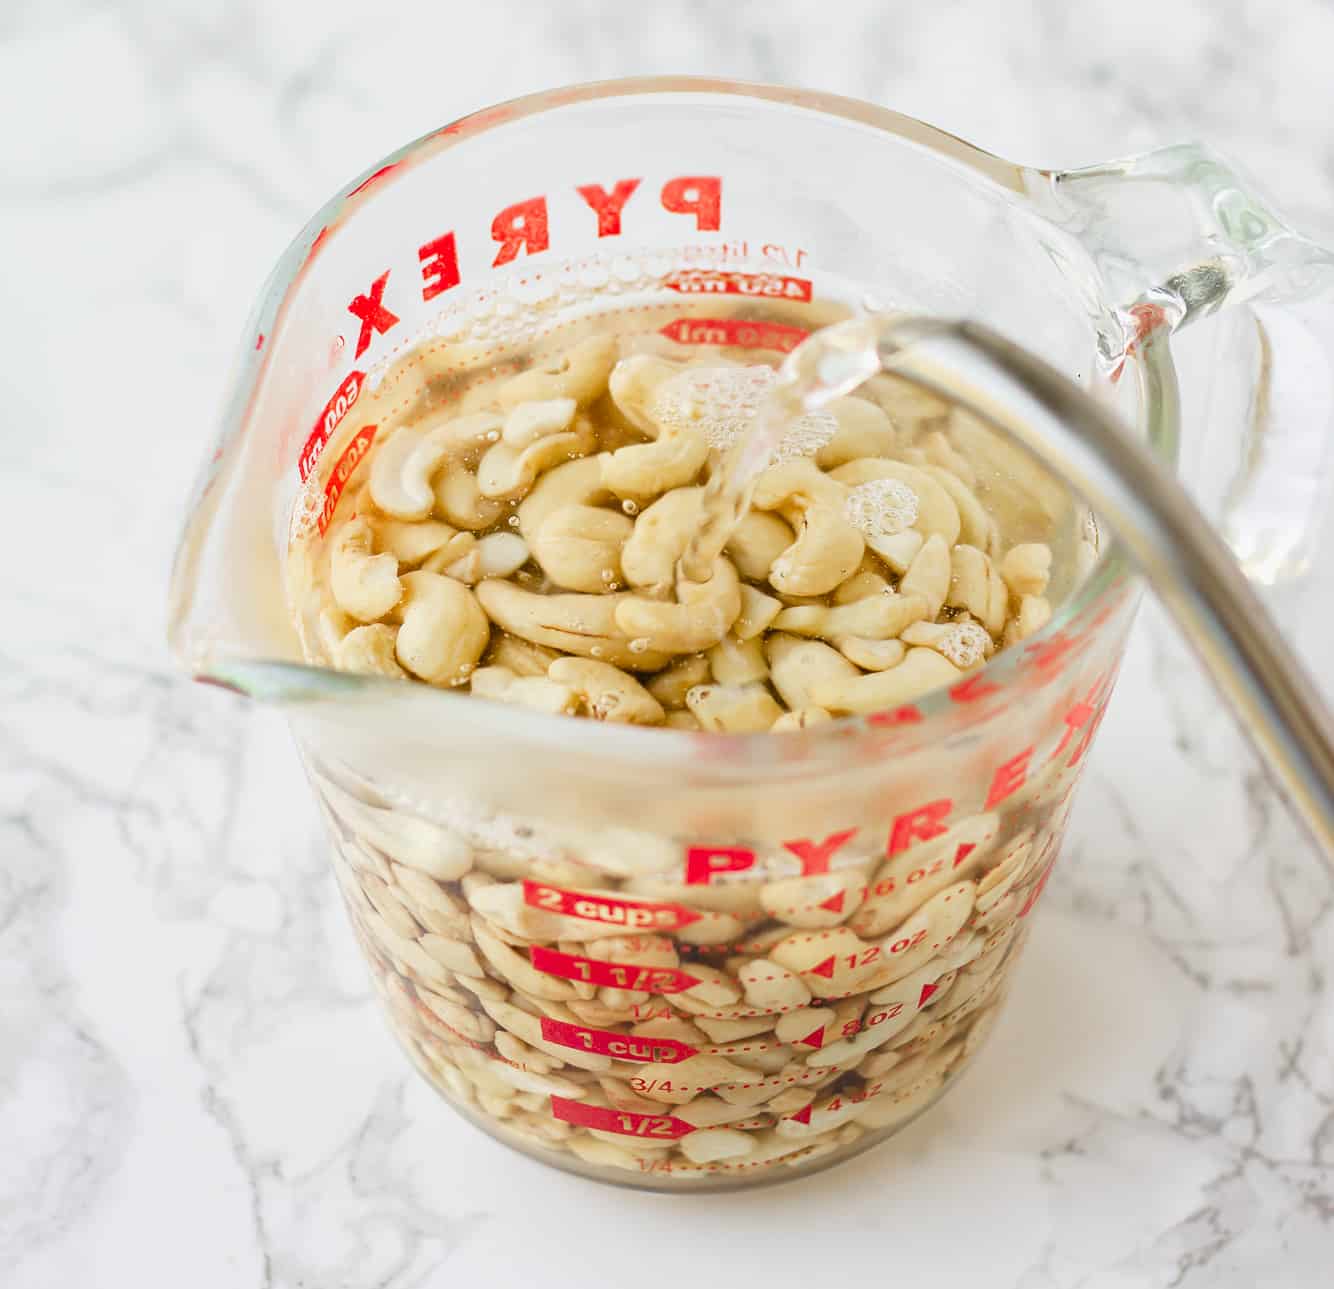 soaking cashews in hot water in a large glass measuring cup.